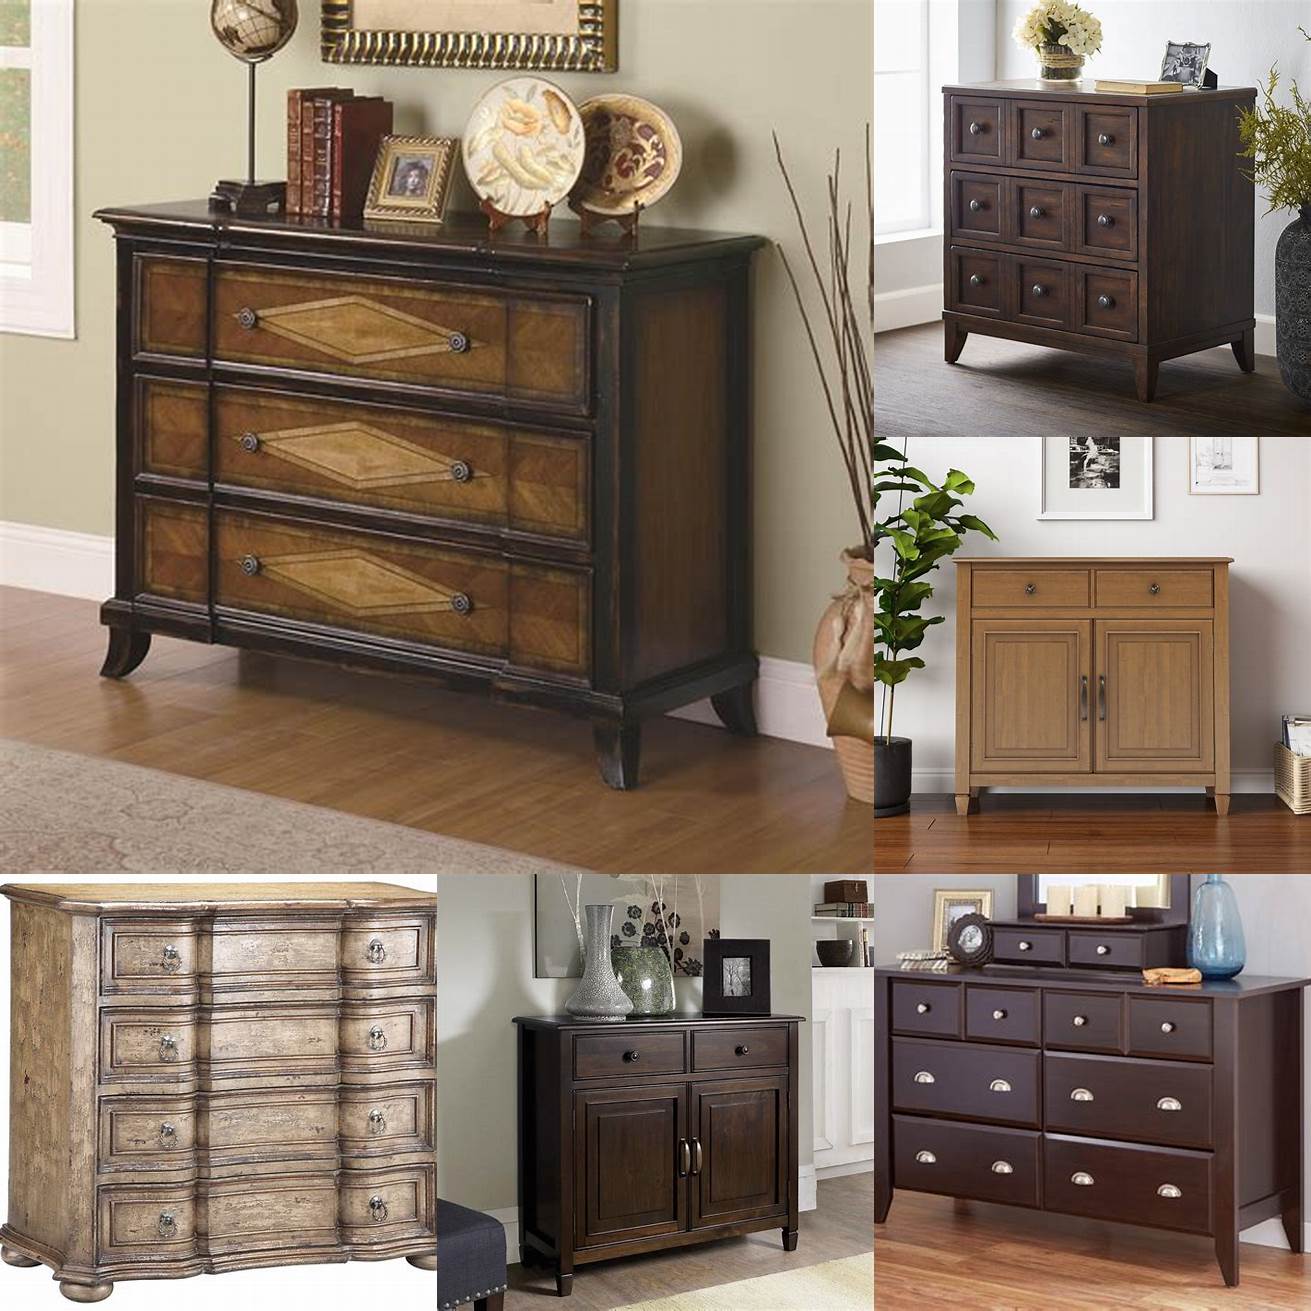 Cabinets and chests